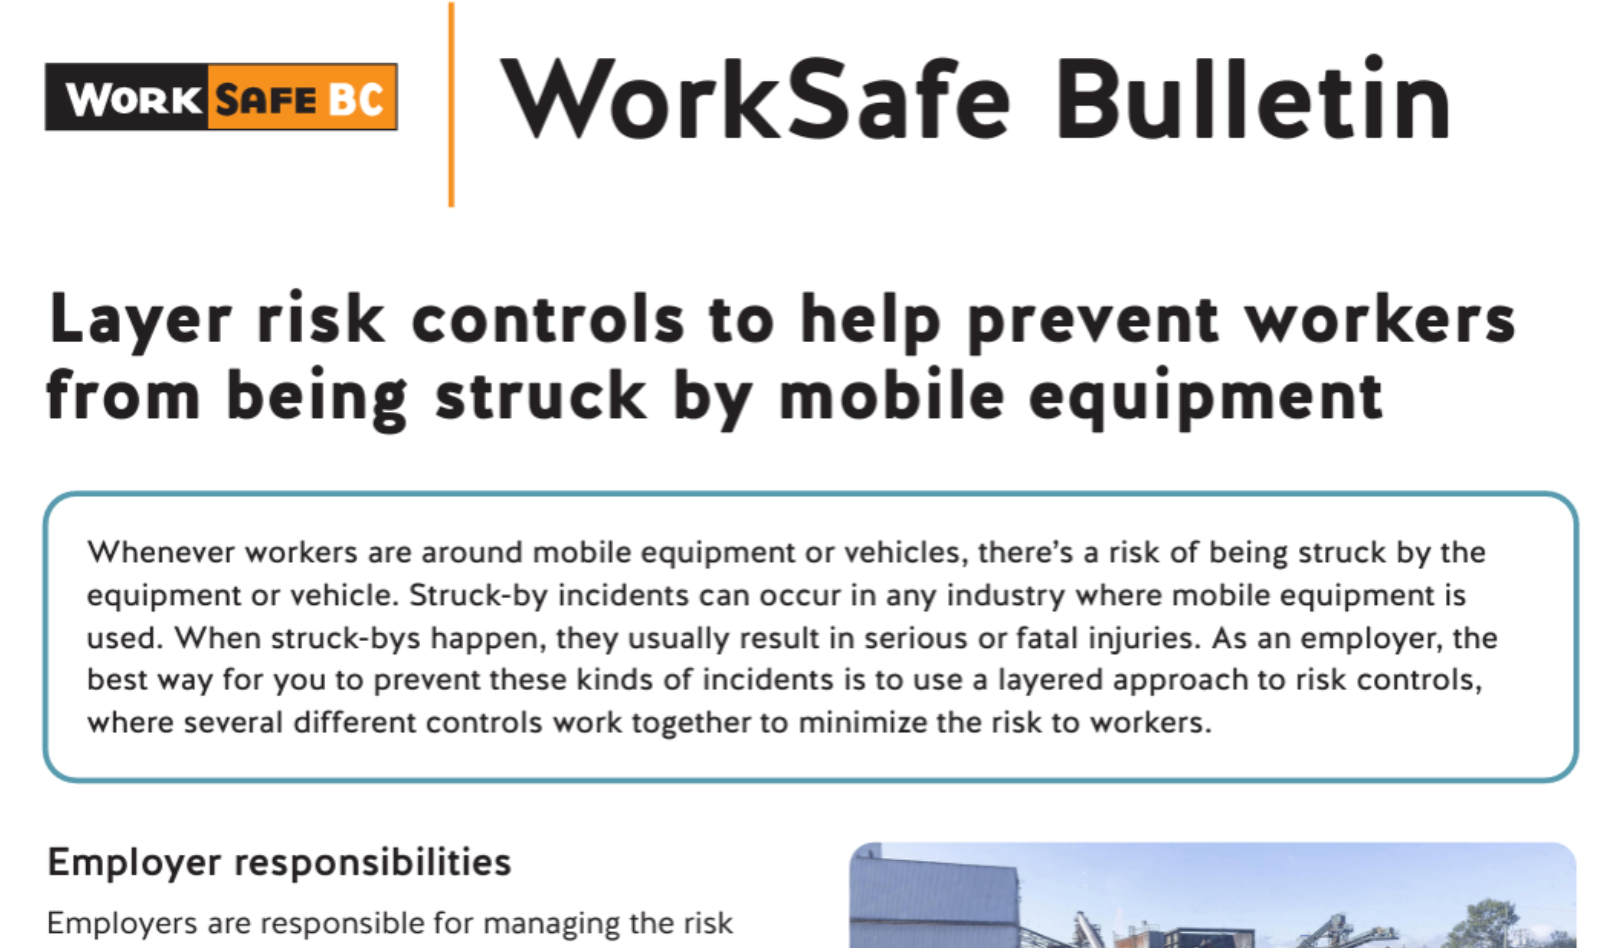 Layer Risk Controls to Help Prevent Workers from Being Struck by Mobile Equipment